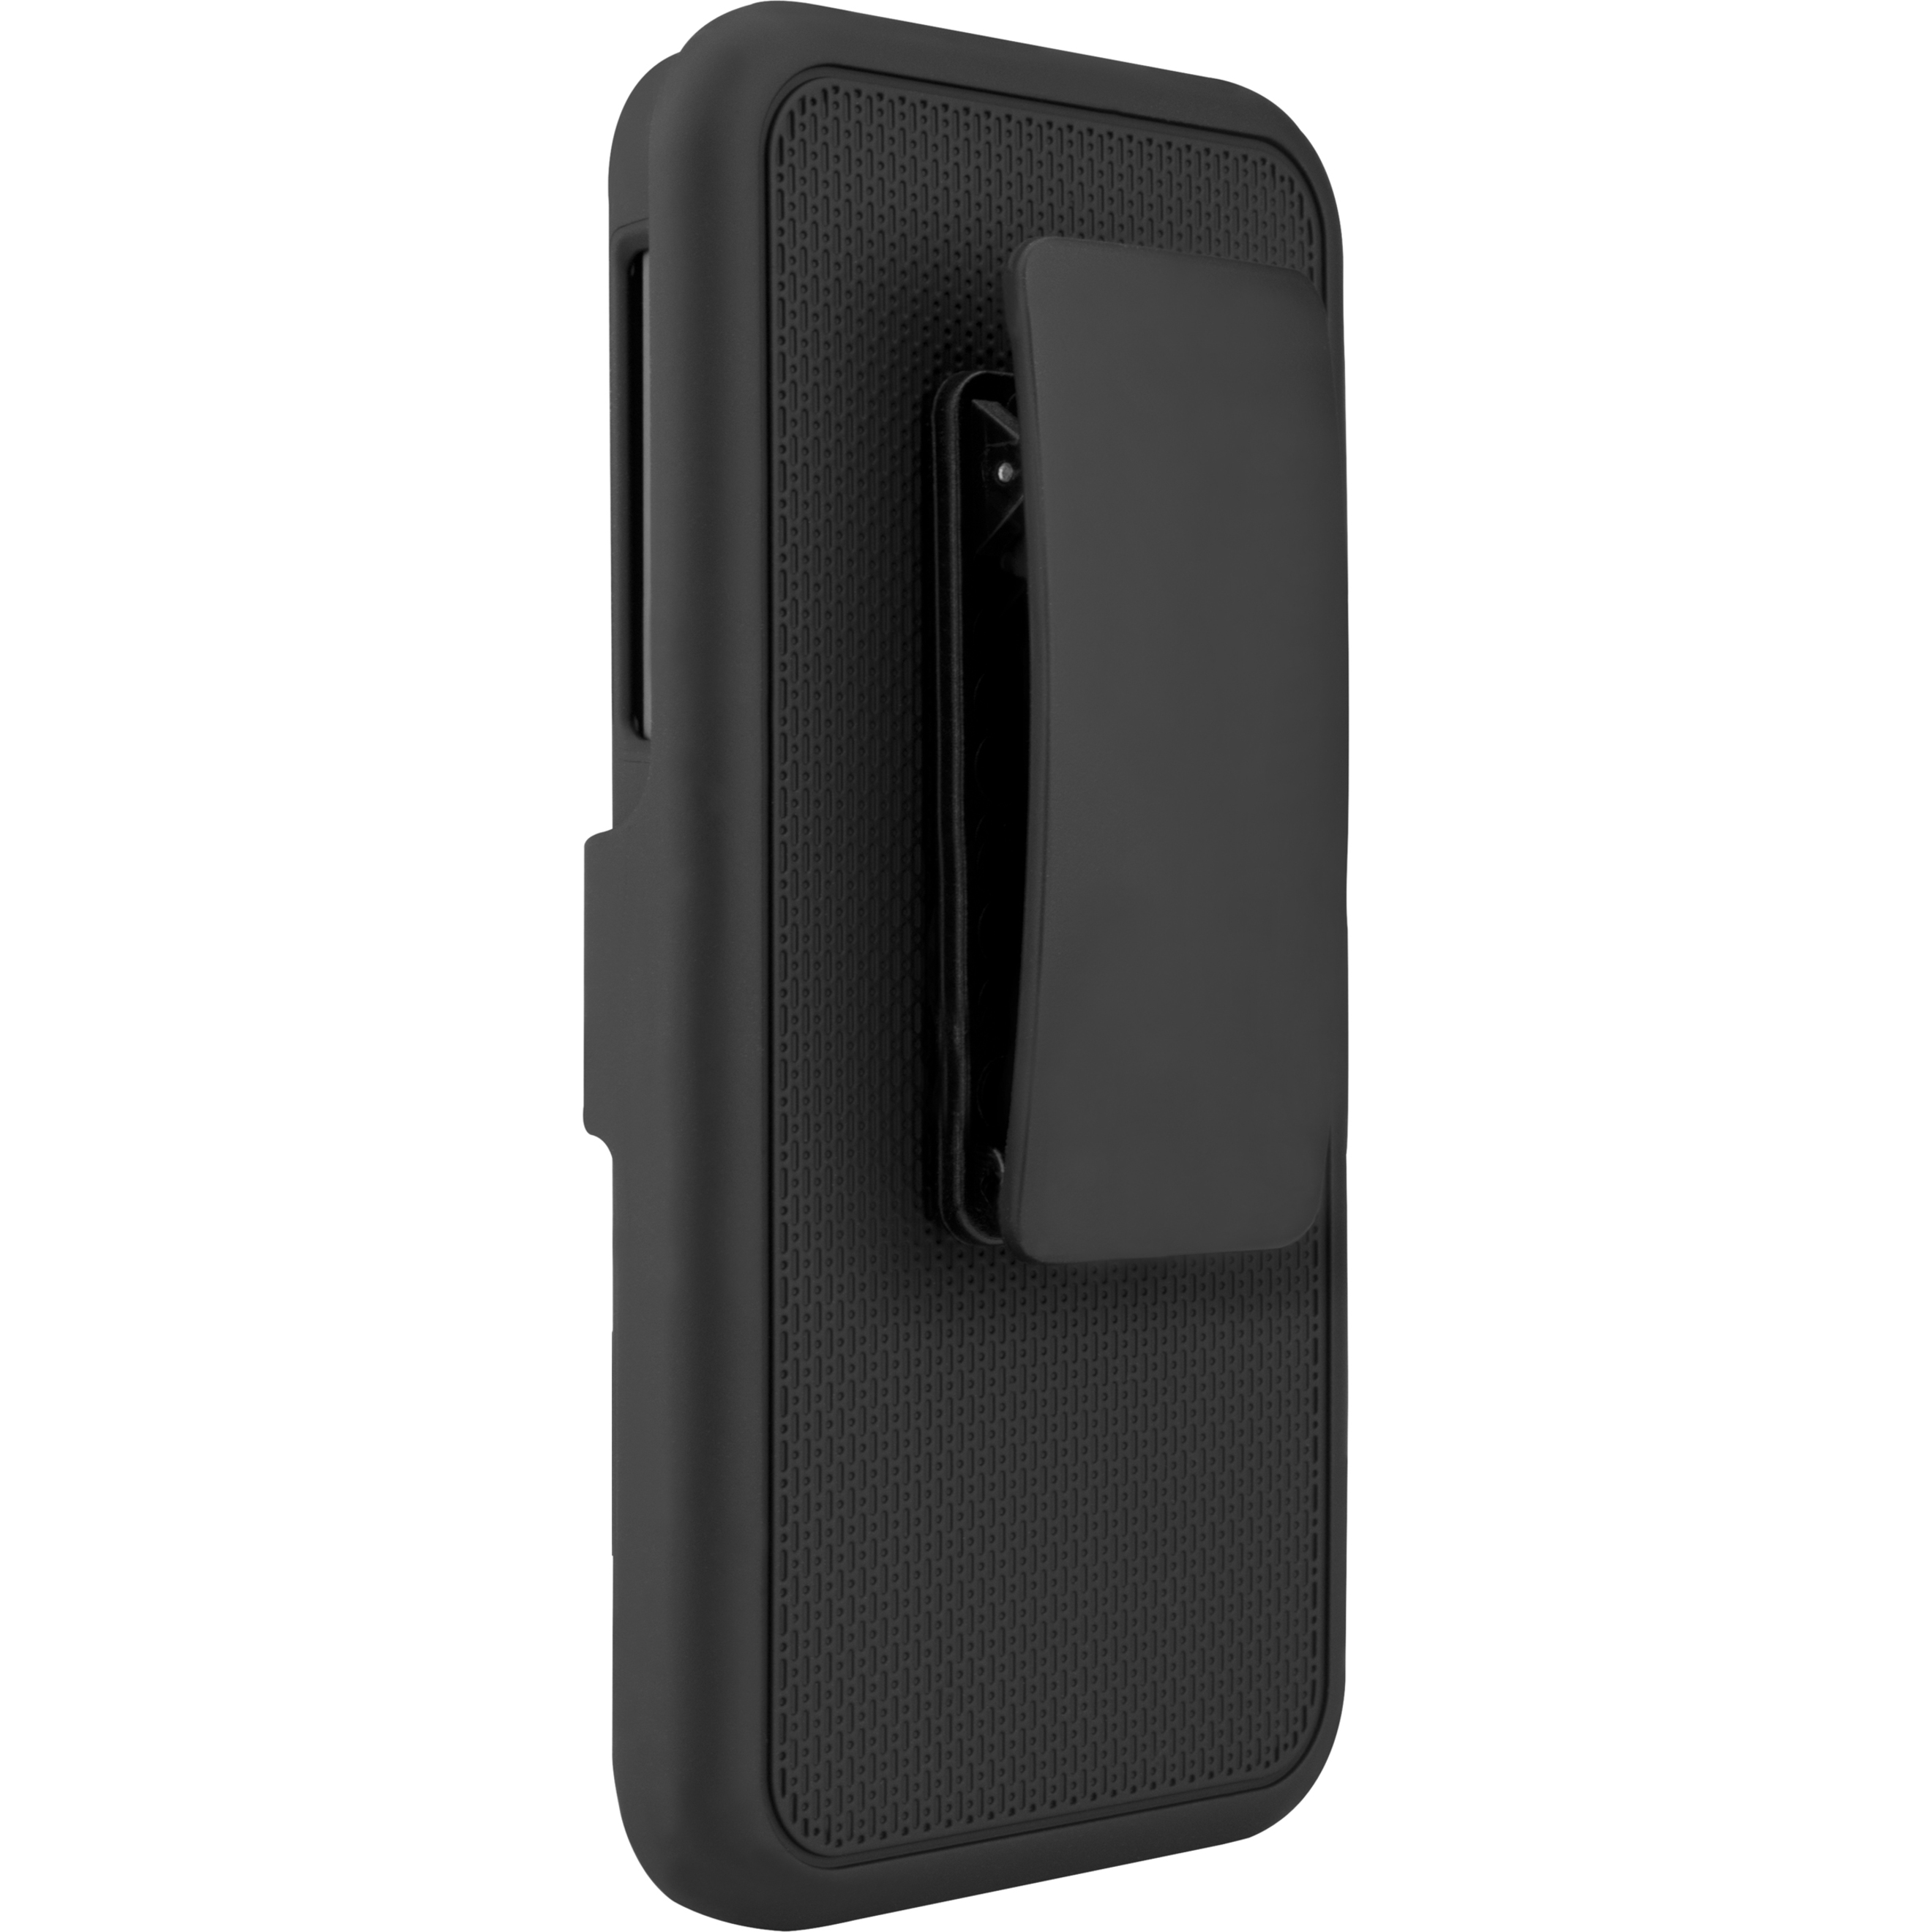 PureGear Carrying Case (Holster) Apple iPhone Smartphone, Black - image 2 of 4